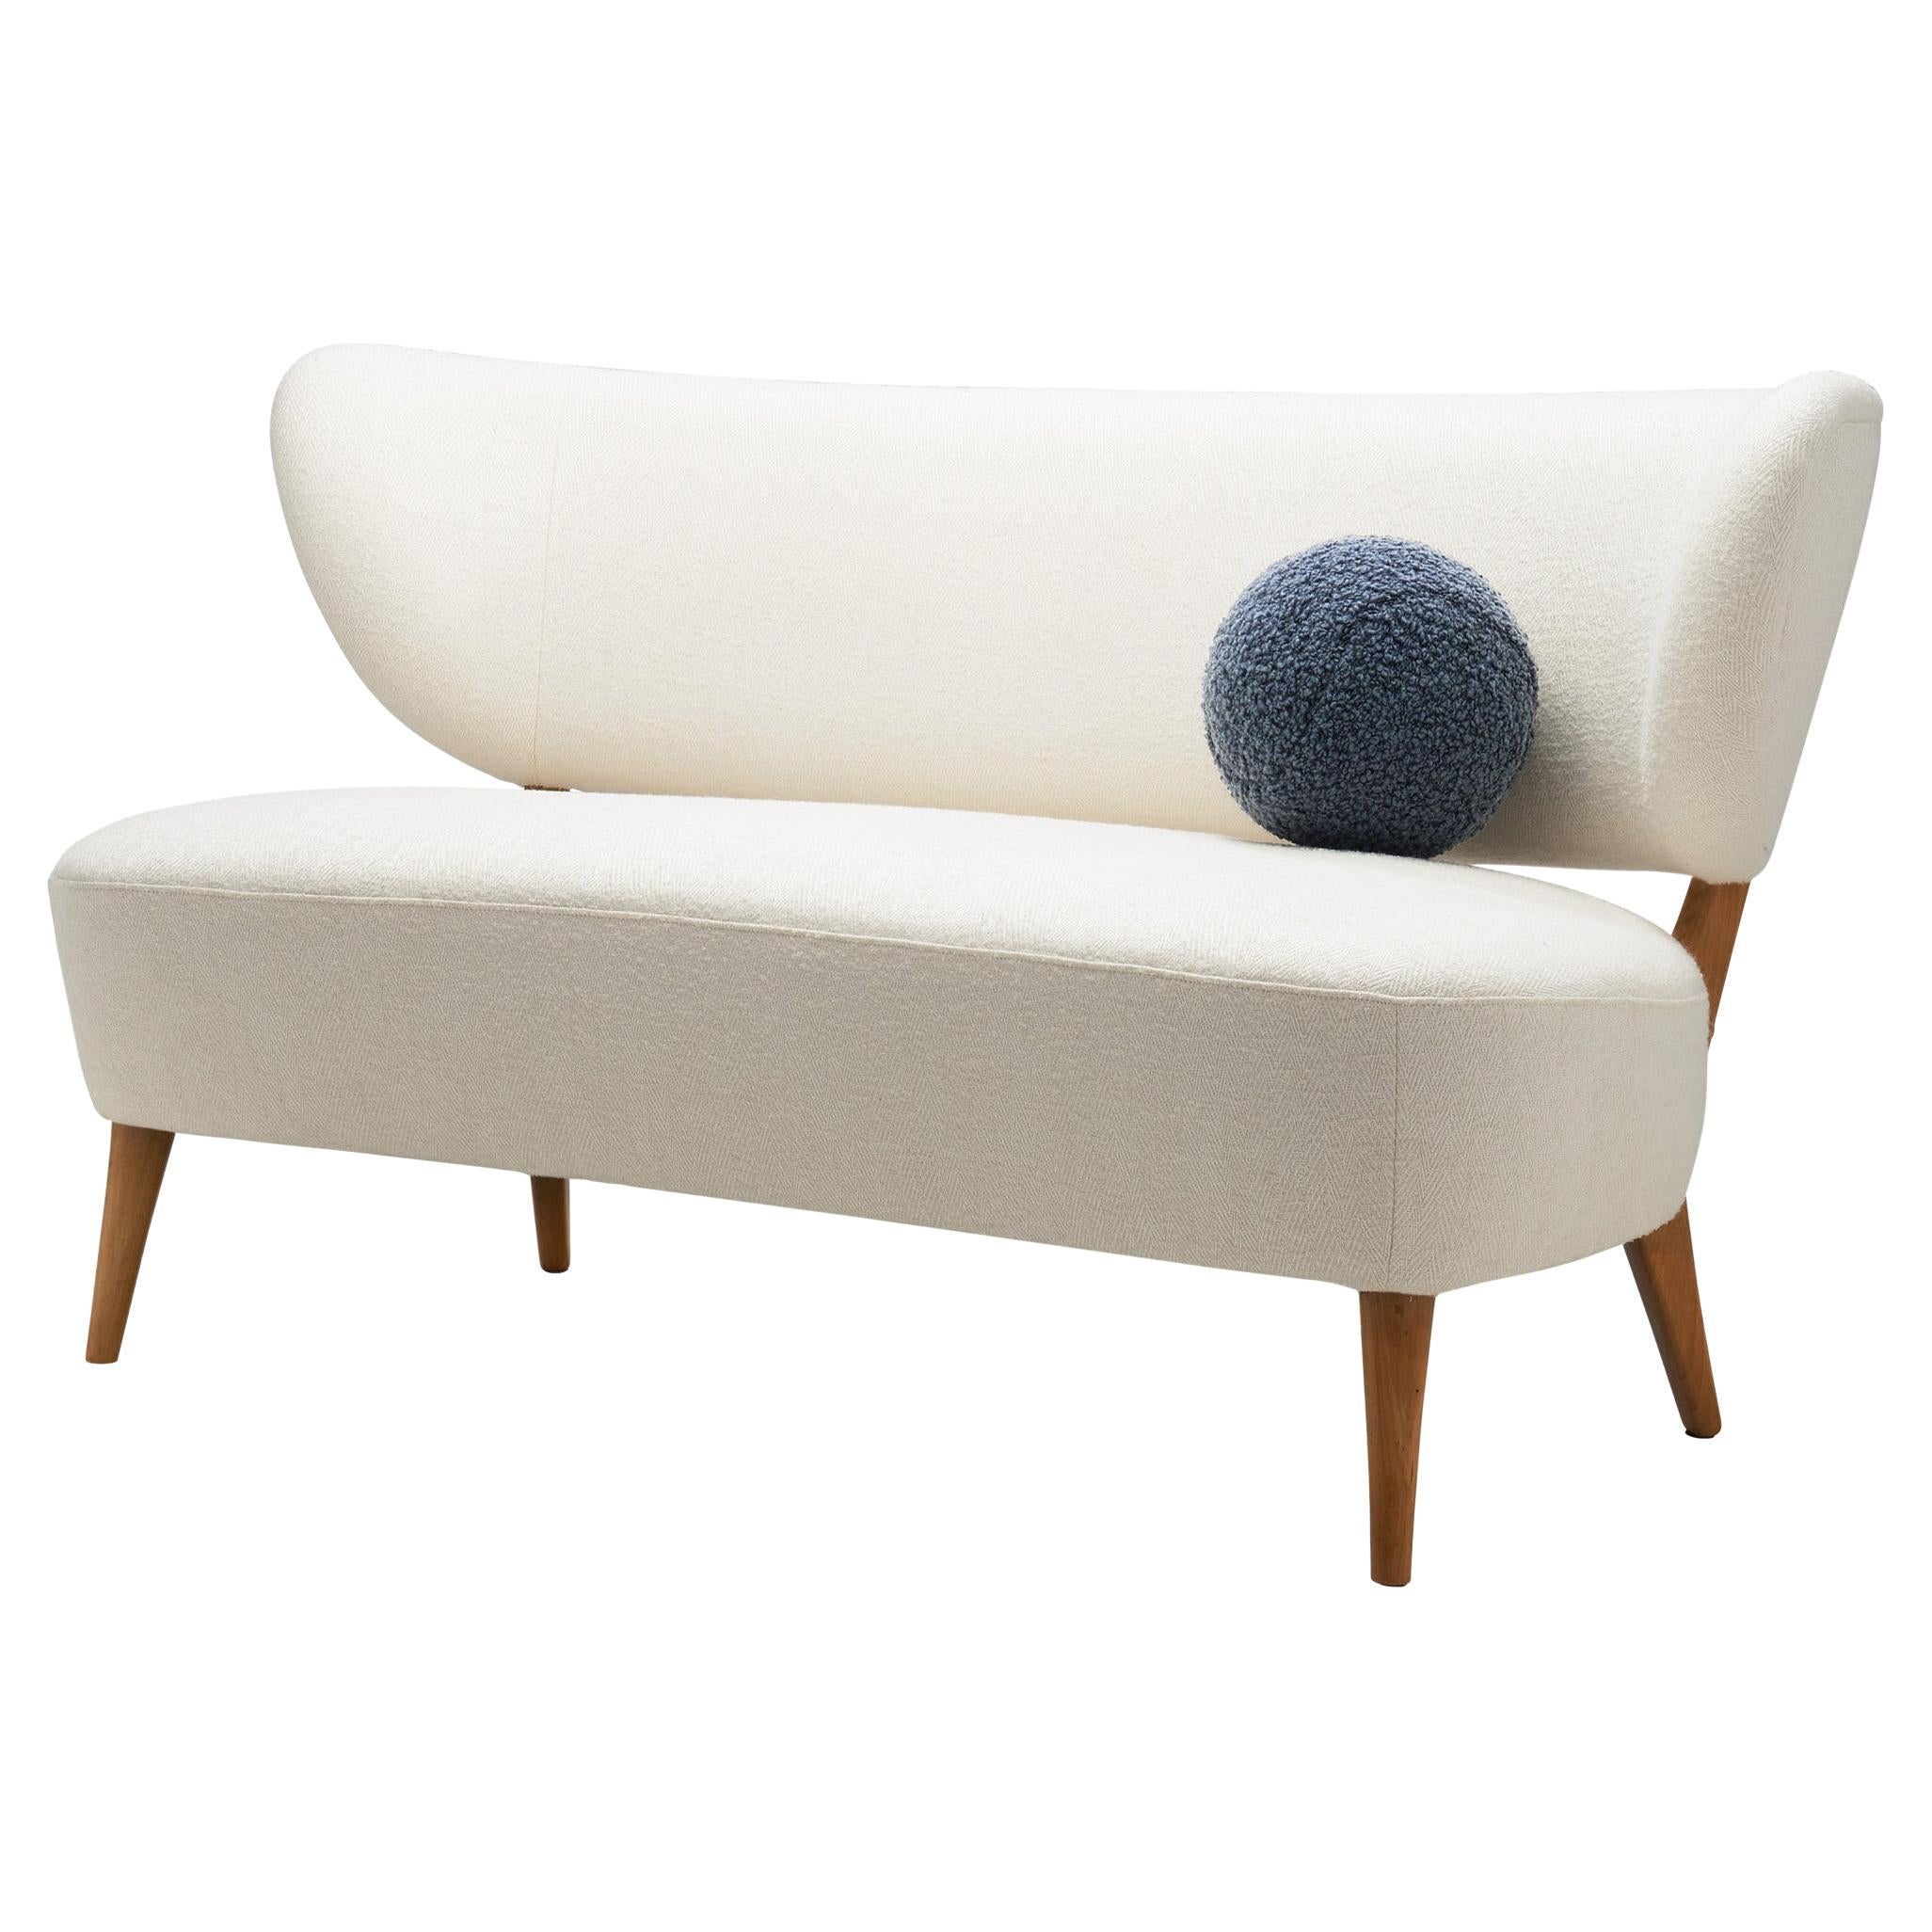 Two-Seater Sofa by Otto Schulz 'Attr.' for Boet, Sweden, 1940s For Sale